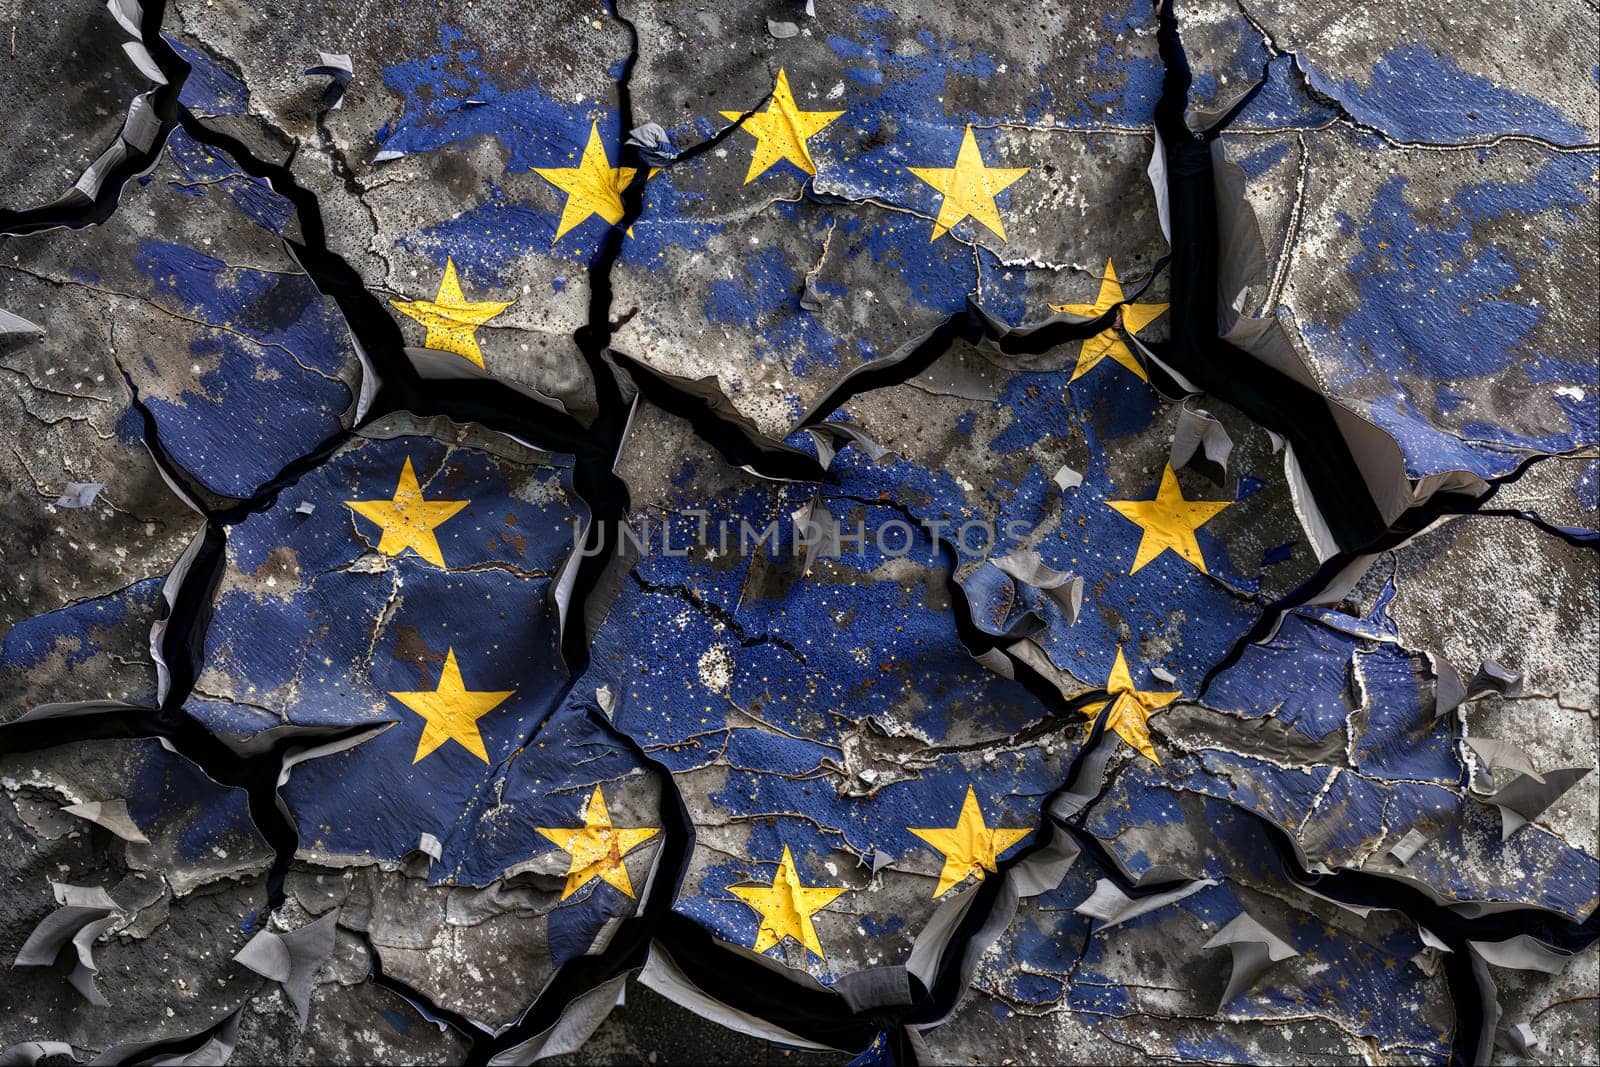 The European flag was painted on cracked concrete symbolizing the divided state of Europe with broken stars and blue color